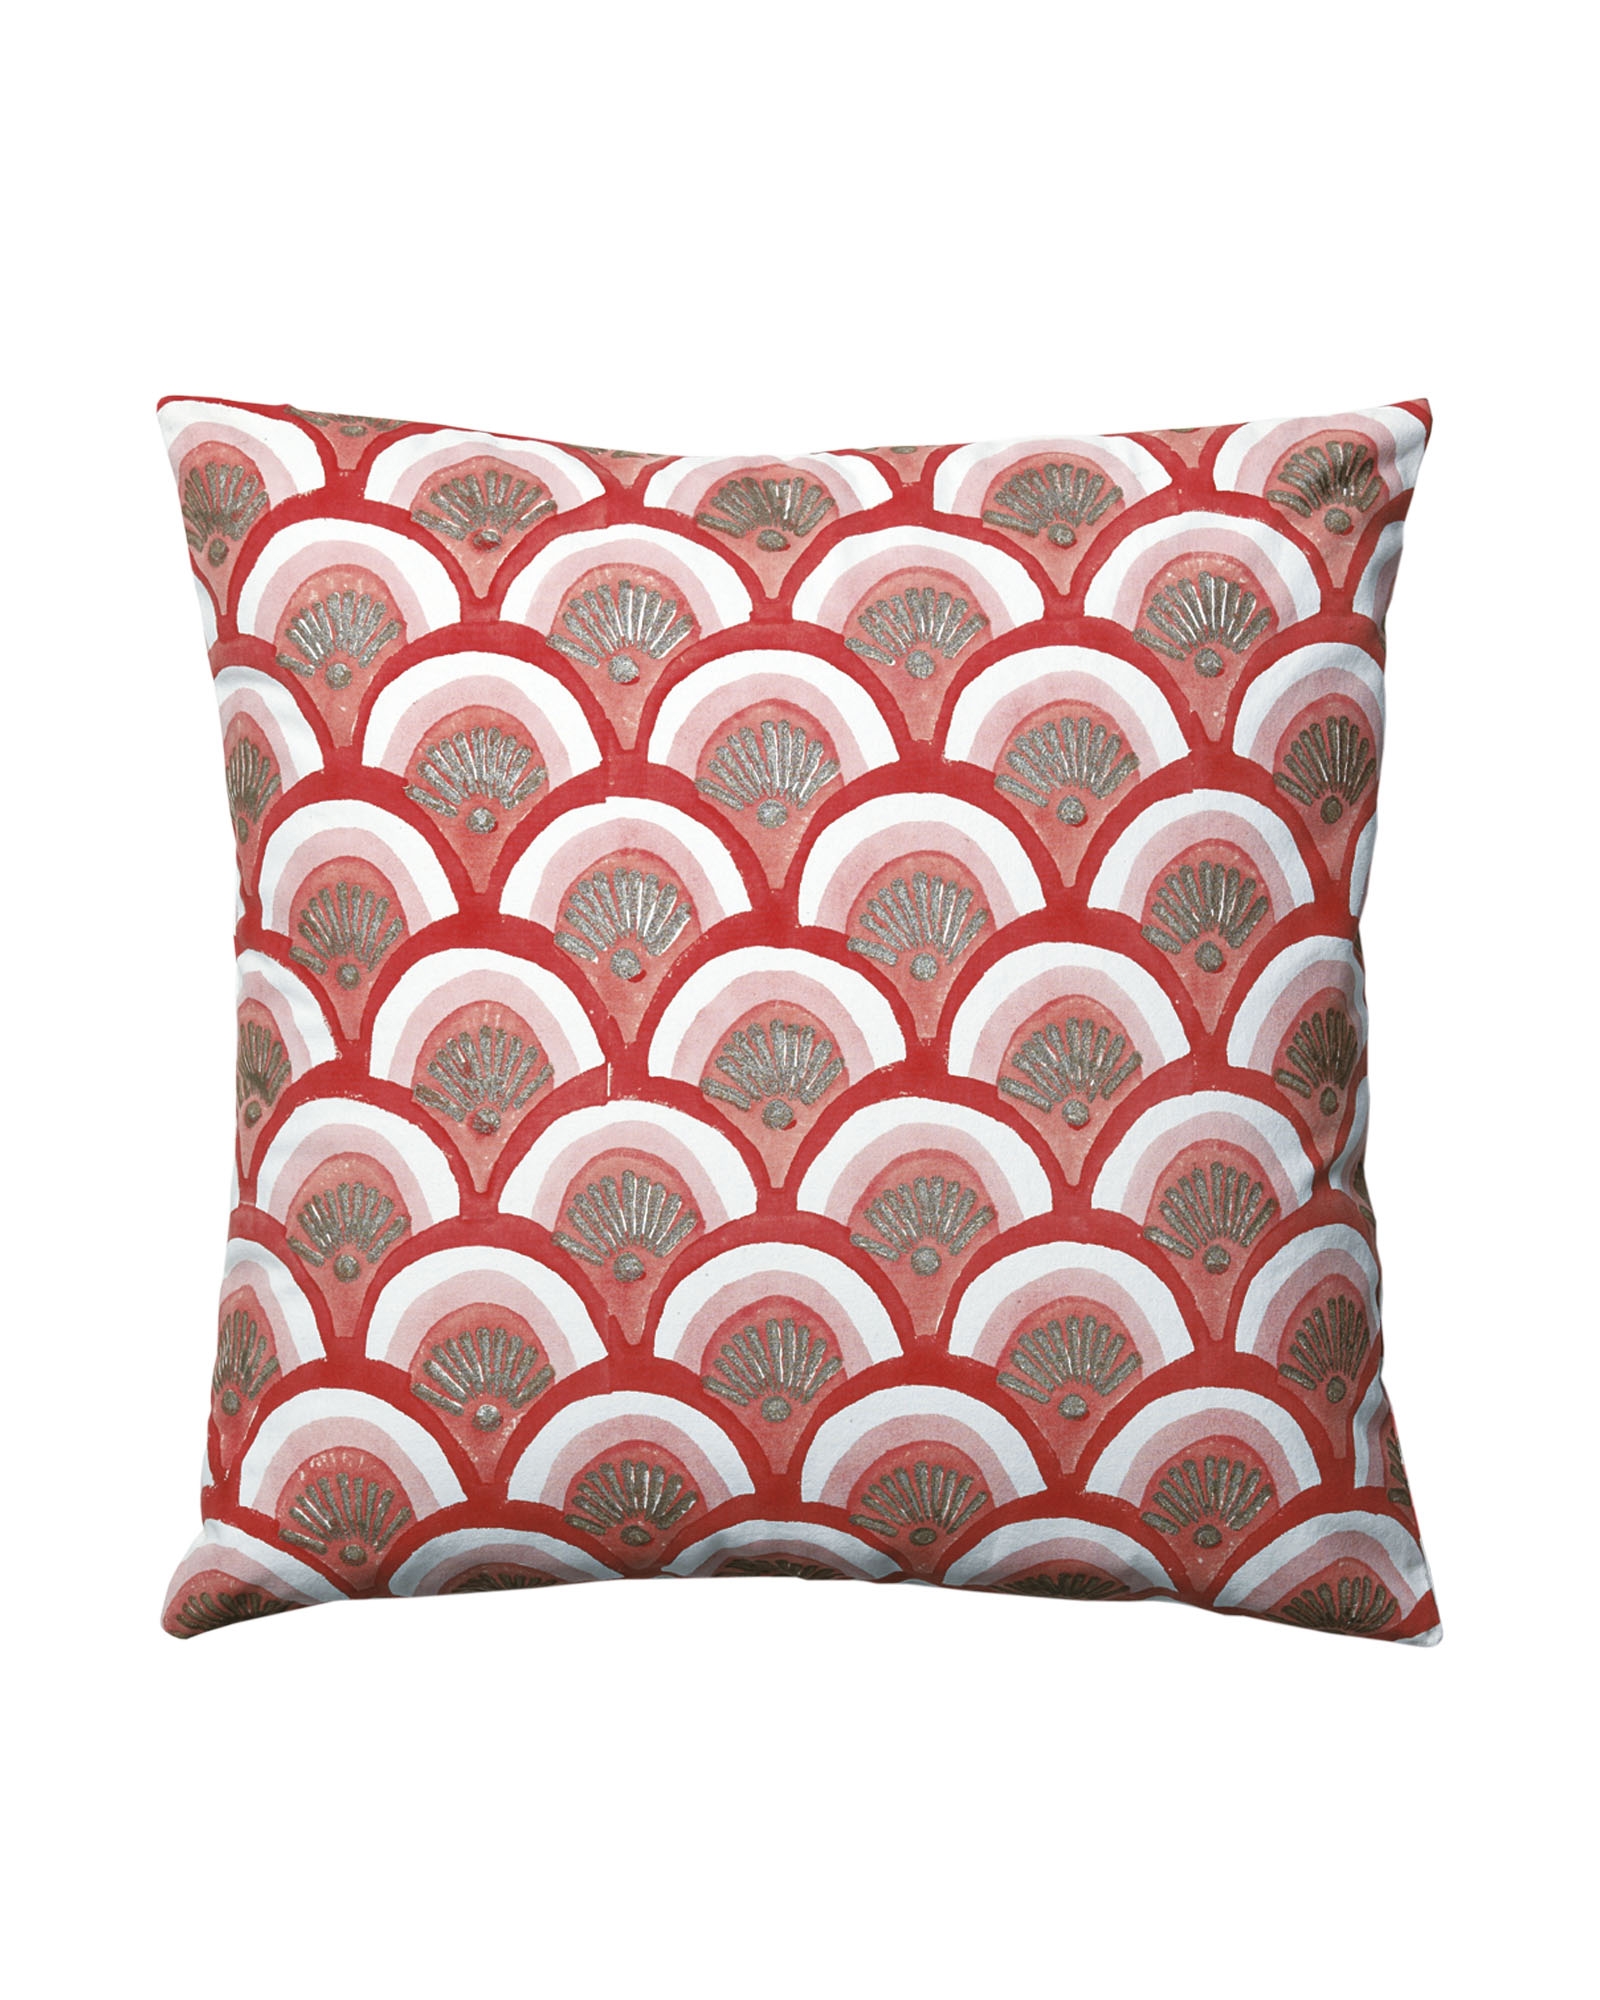 Kyoto Pillow Covers - Poppy - 20"SQ. - Insert sold separately - Image 0